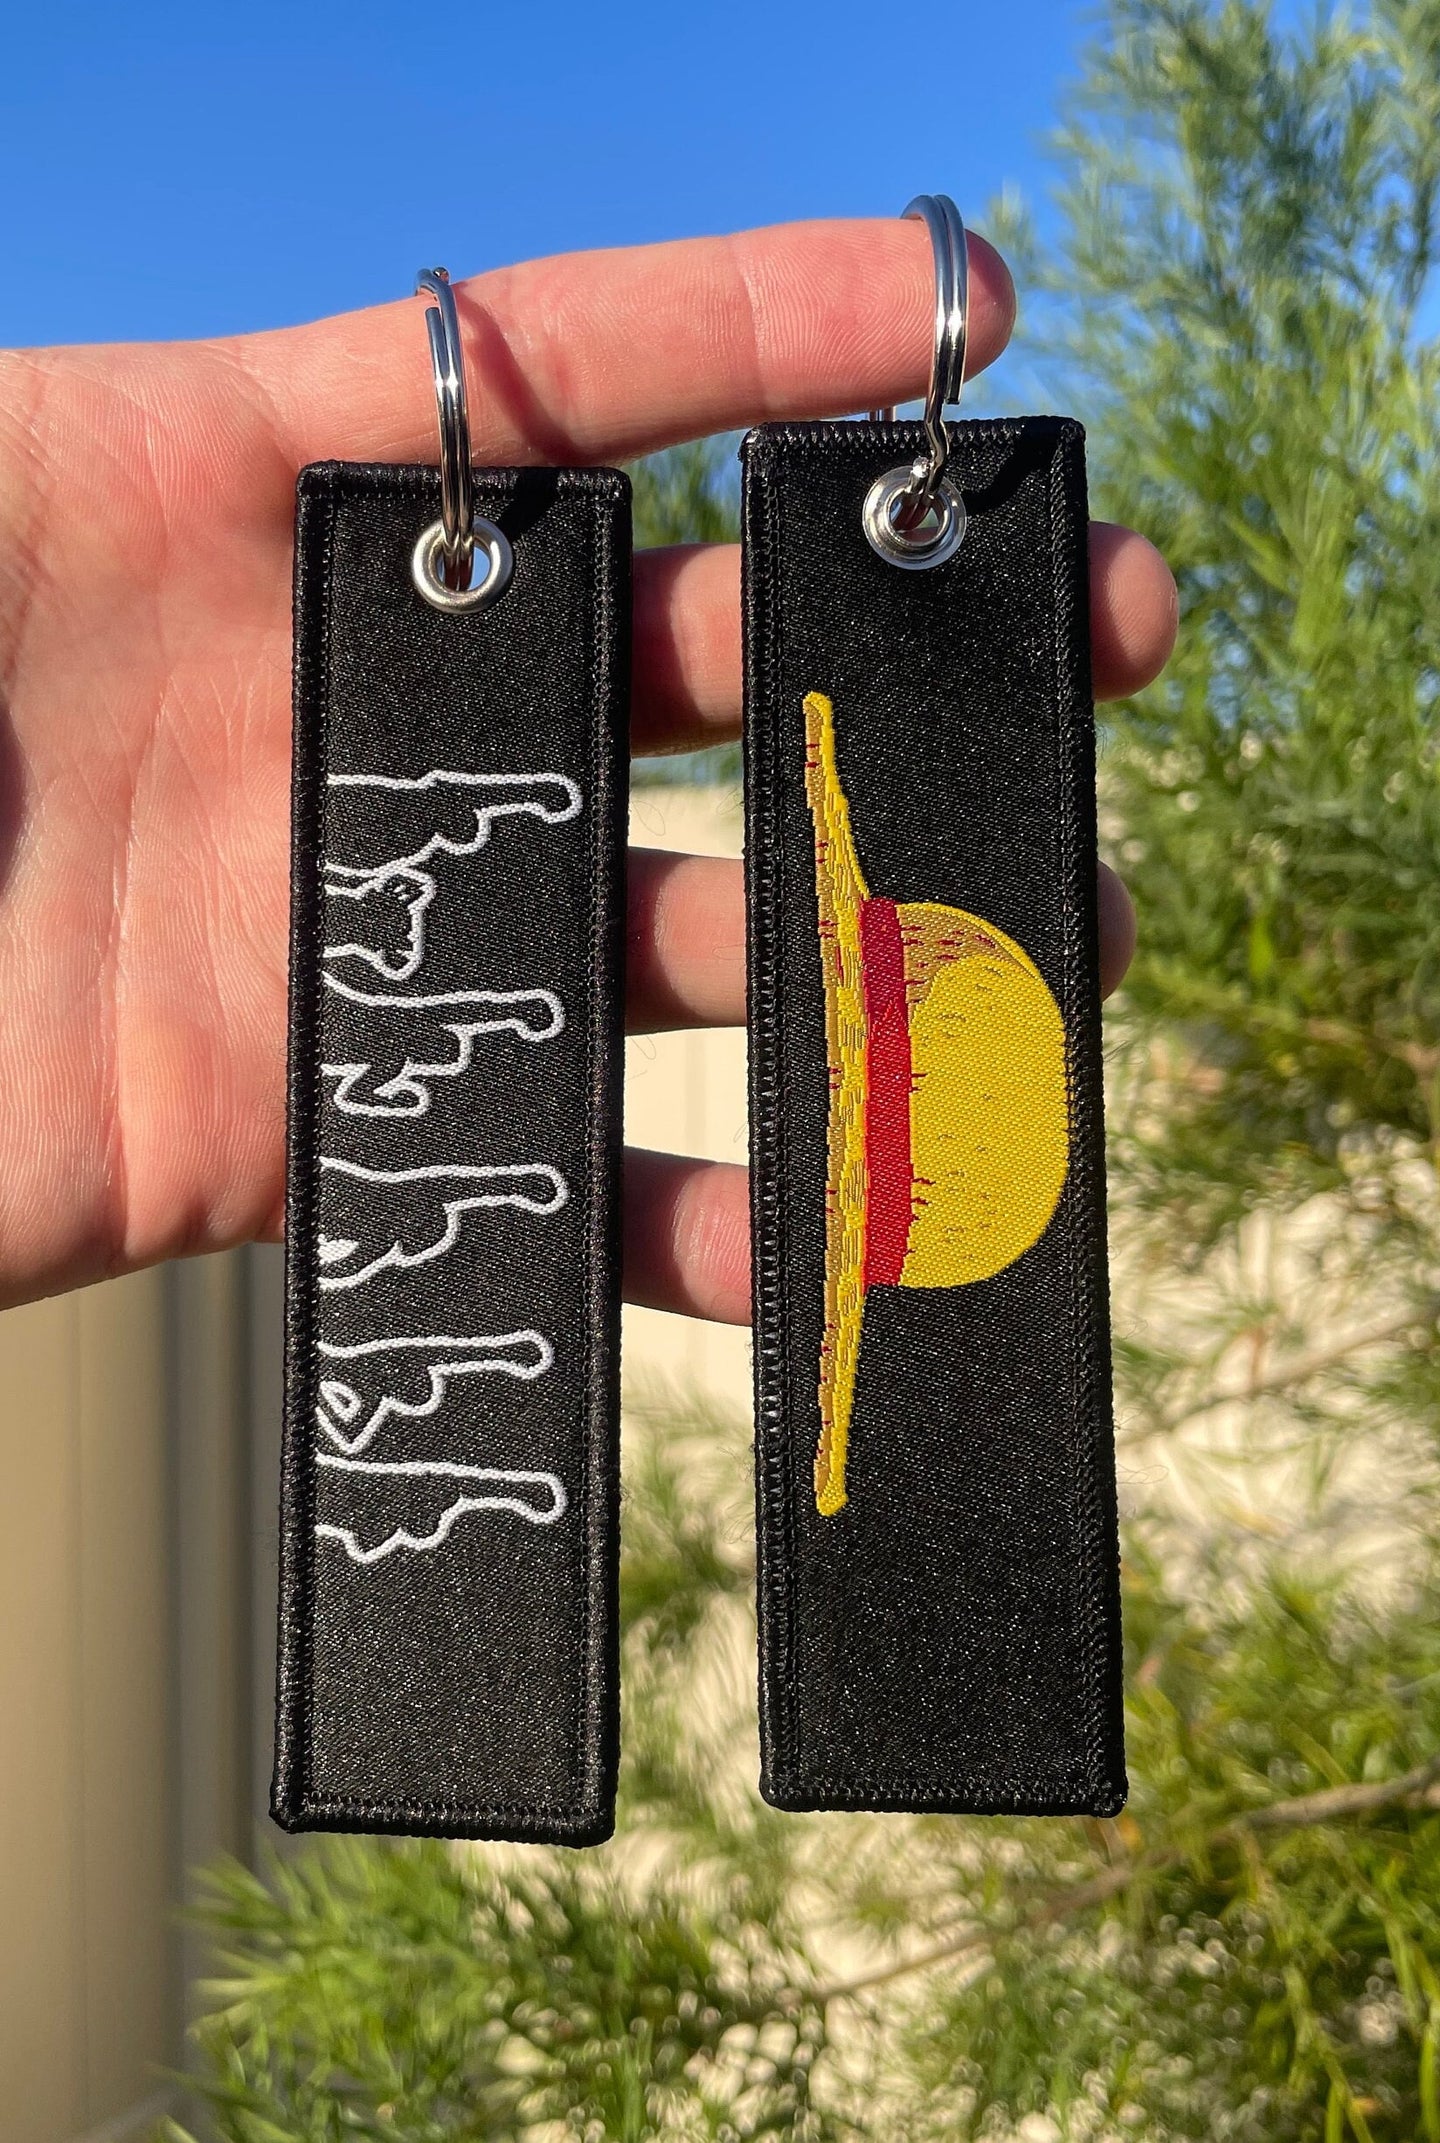 Embroidered Anime Jet Tag / Key Tag